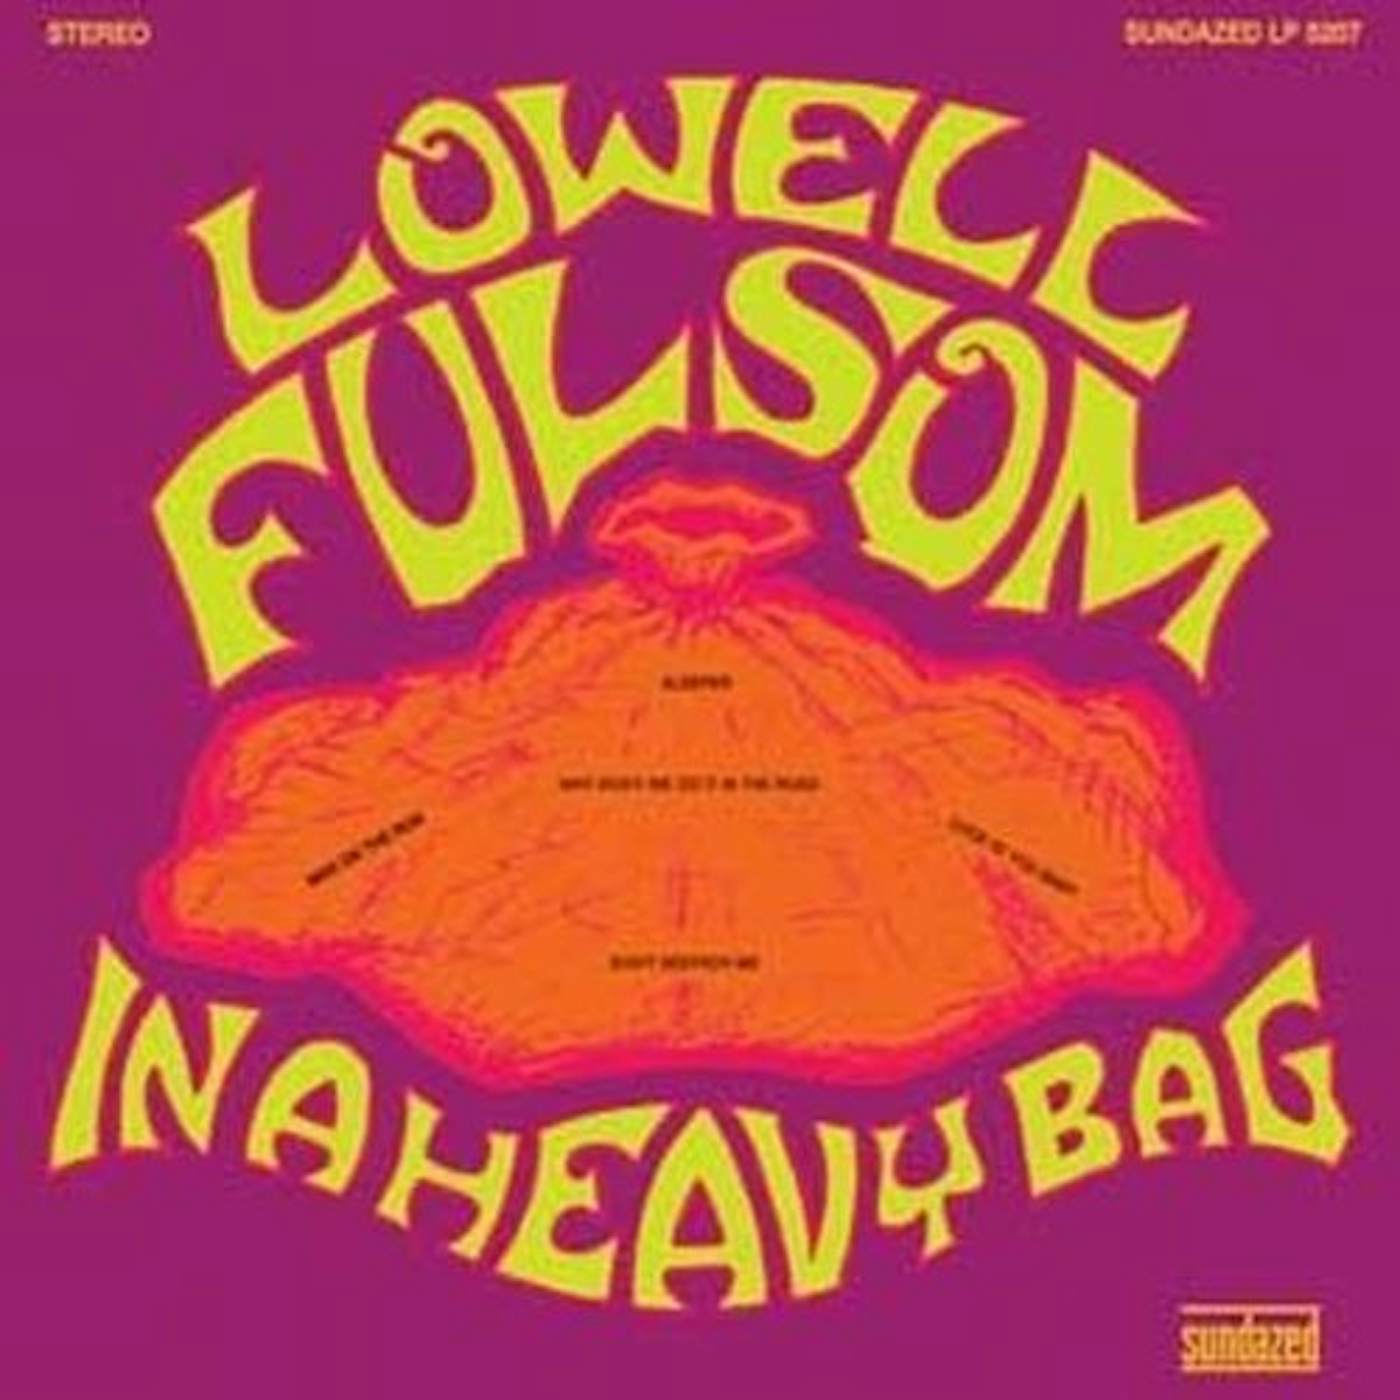 Lowell Fulson In A Heavy Bag Vinyl Record